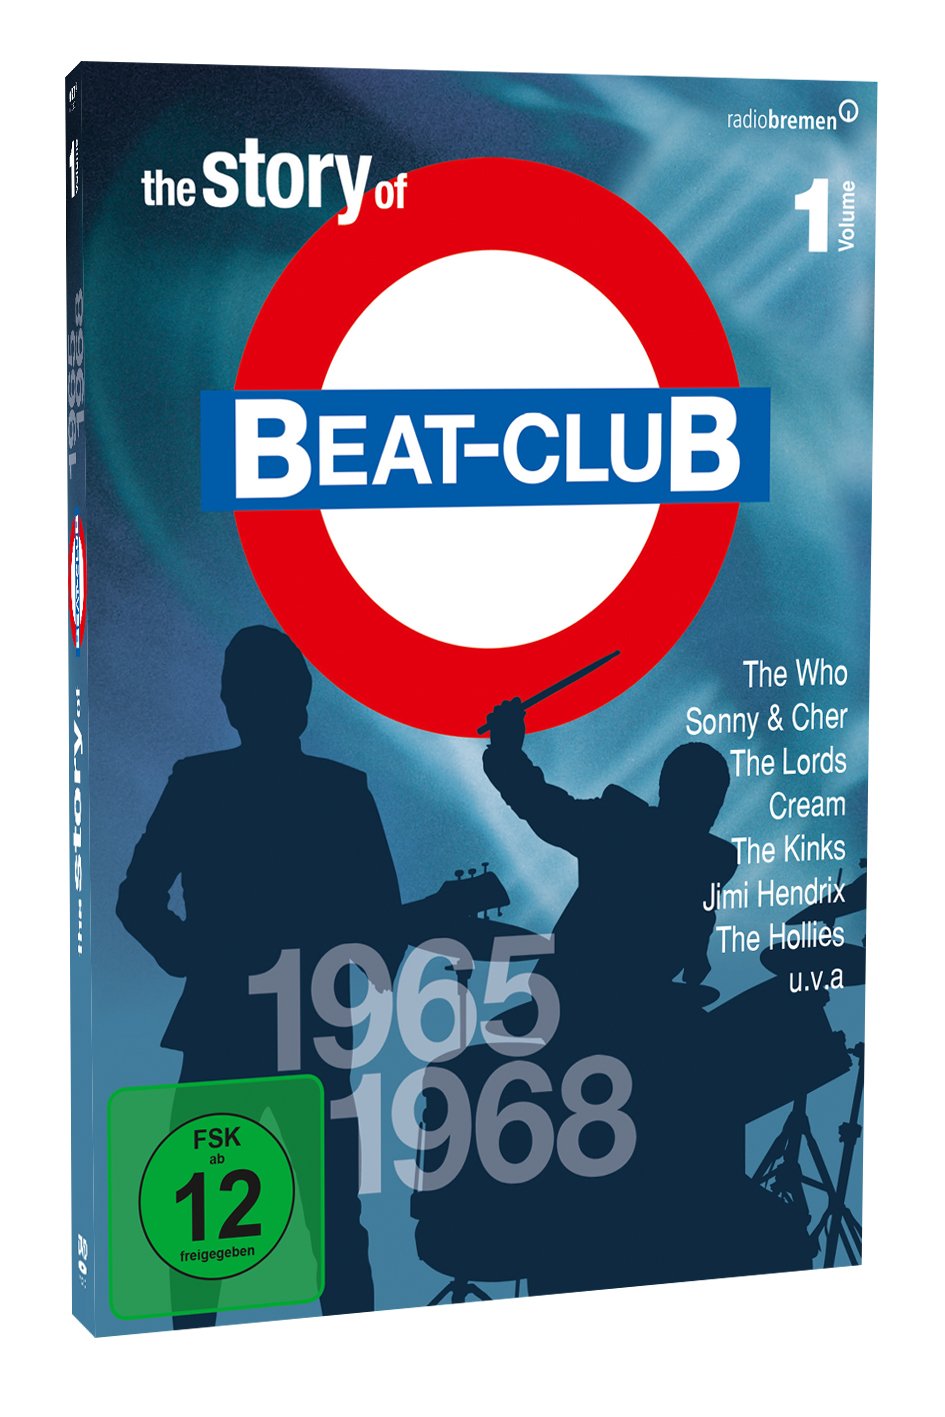 The Story of Beat-Club: 1965 - 1968 (Vol. 1)